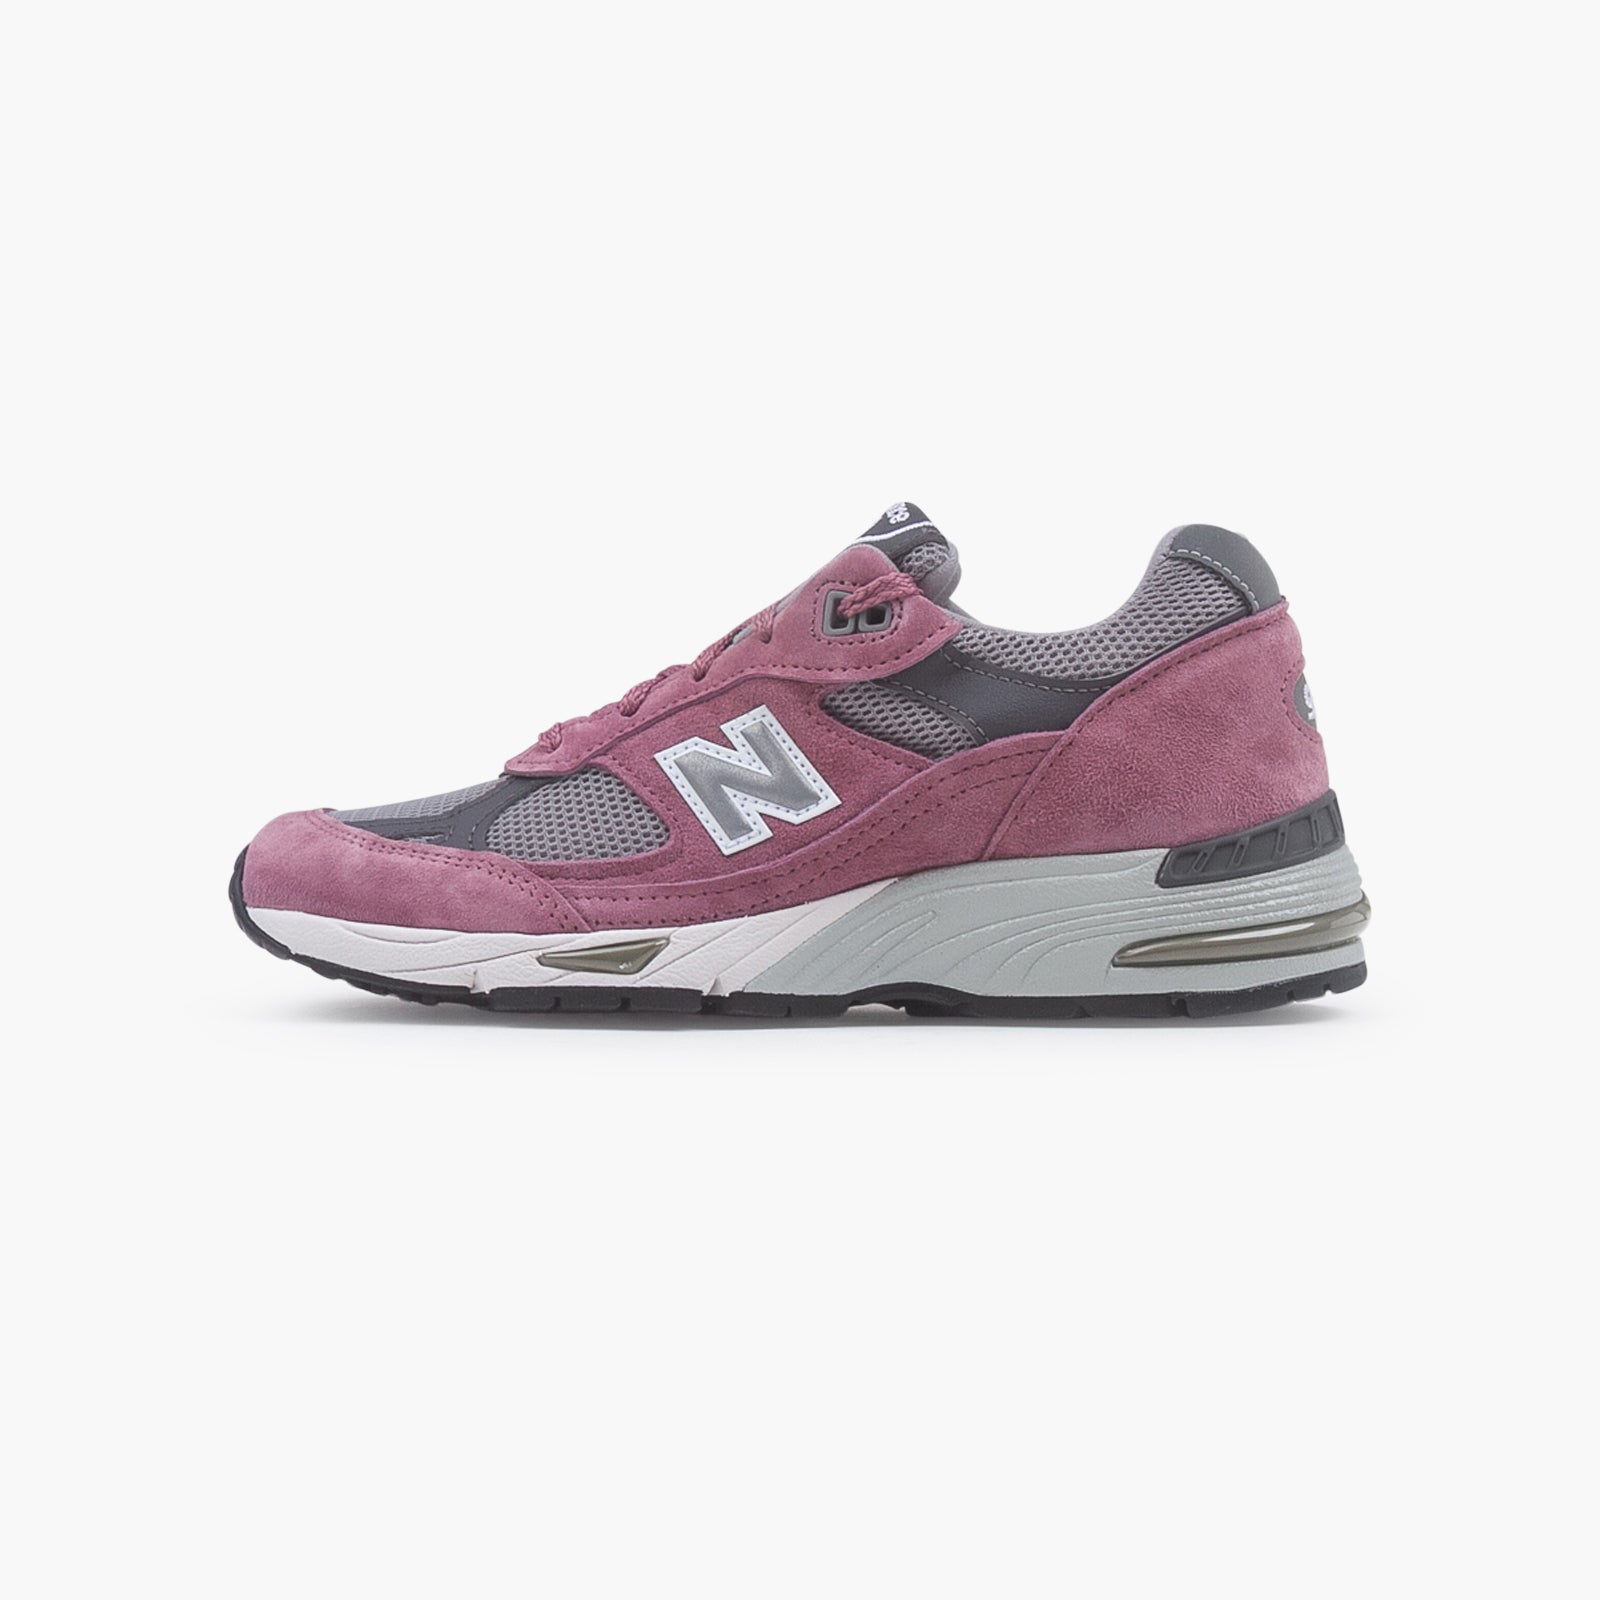 New Balance 991v1 Made in UK Women’s-SUEDE Store